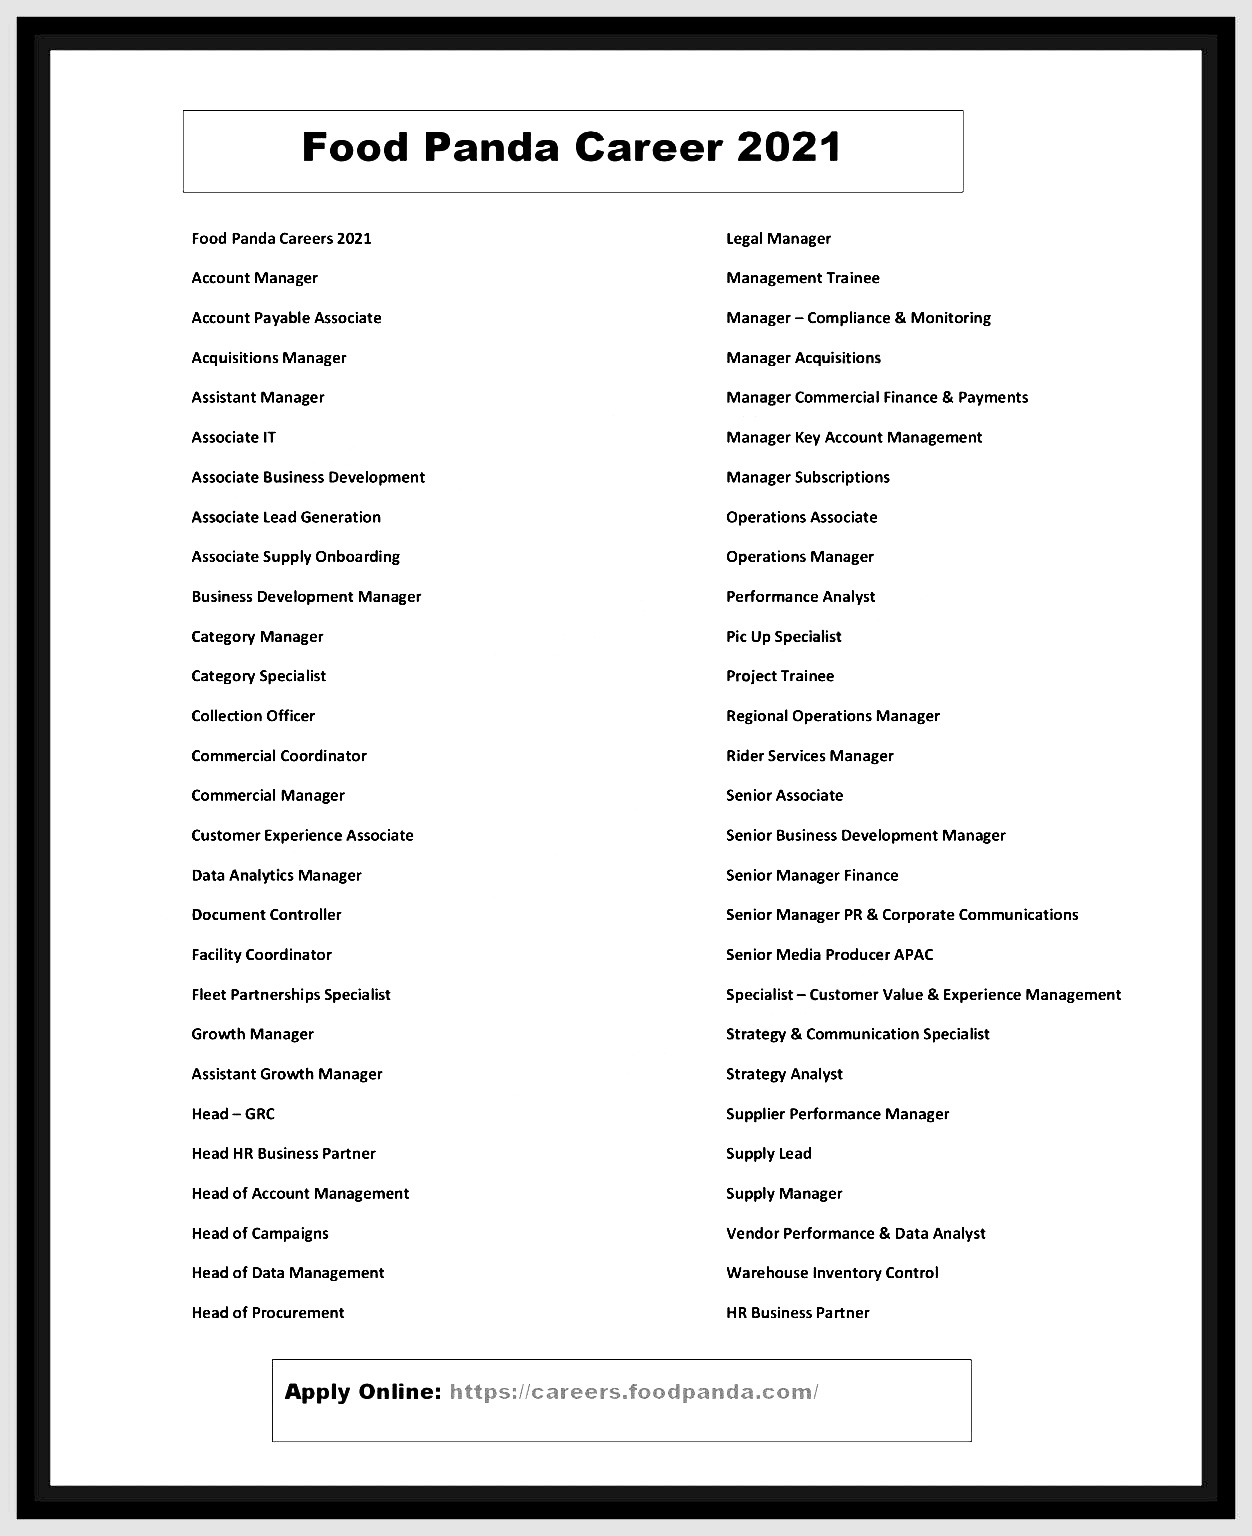 Latest Private Sector Jobs In Pakistan 2022 Food Panda Apply Online